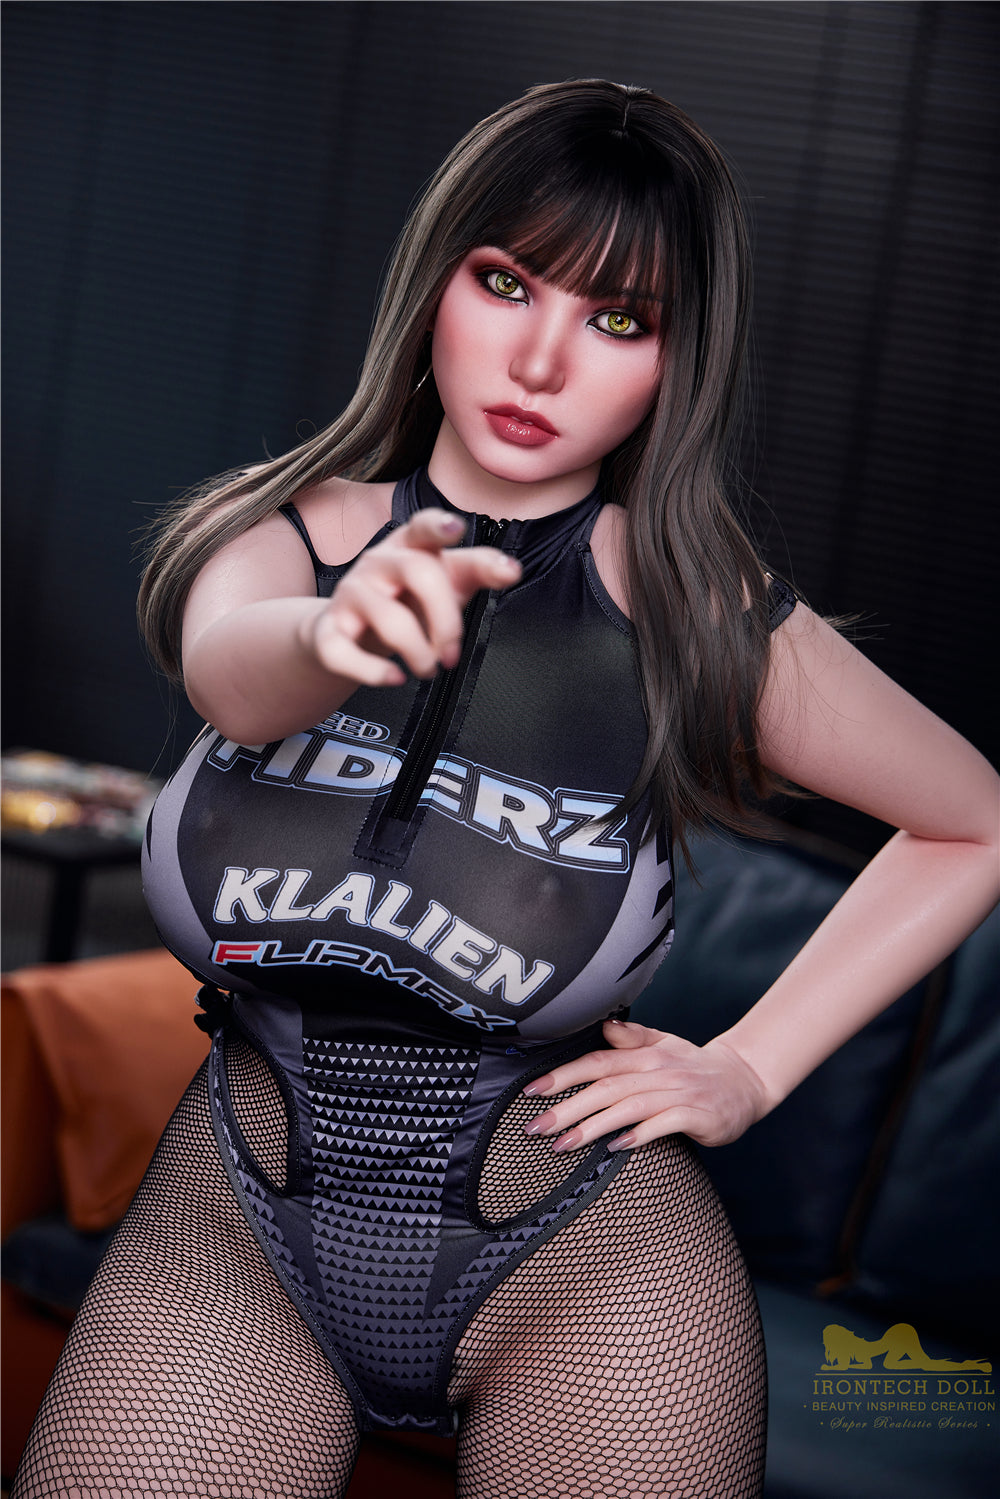 Irontech Doll 162 cm Silicone - Suki | Buy Sex Dolls at DOLLS ACTUALLY